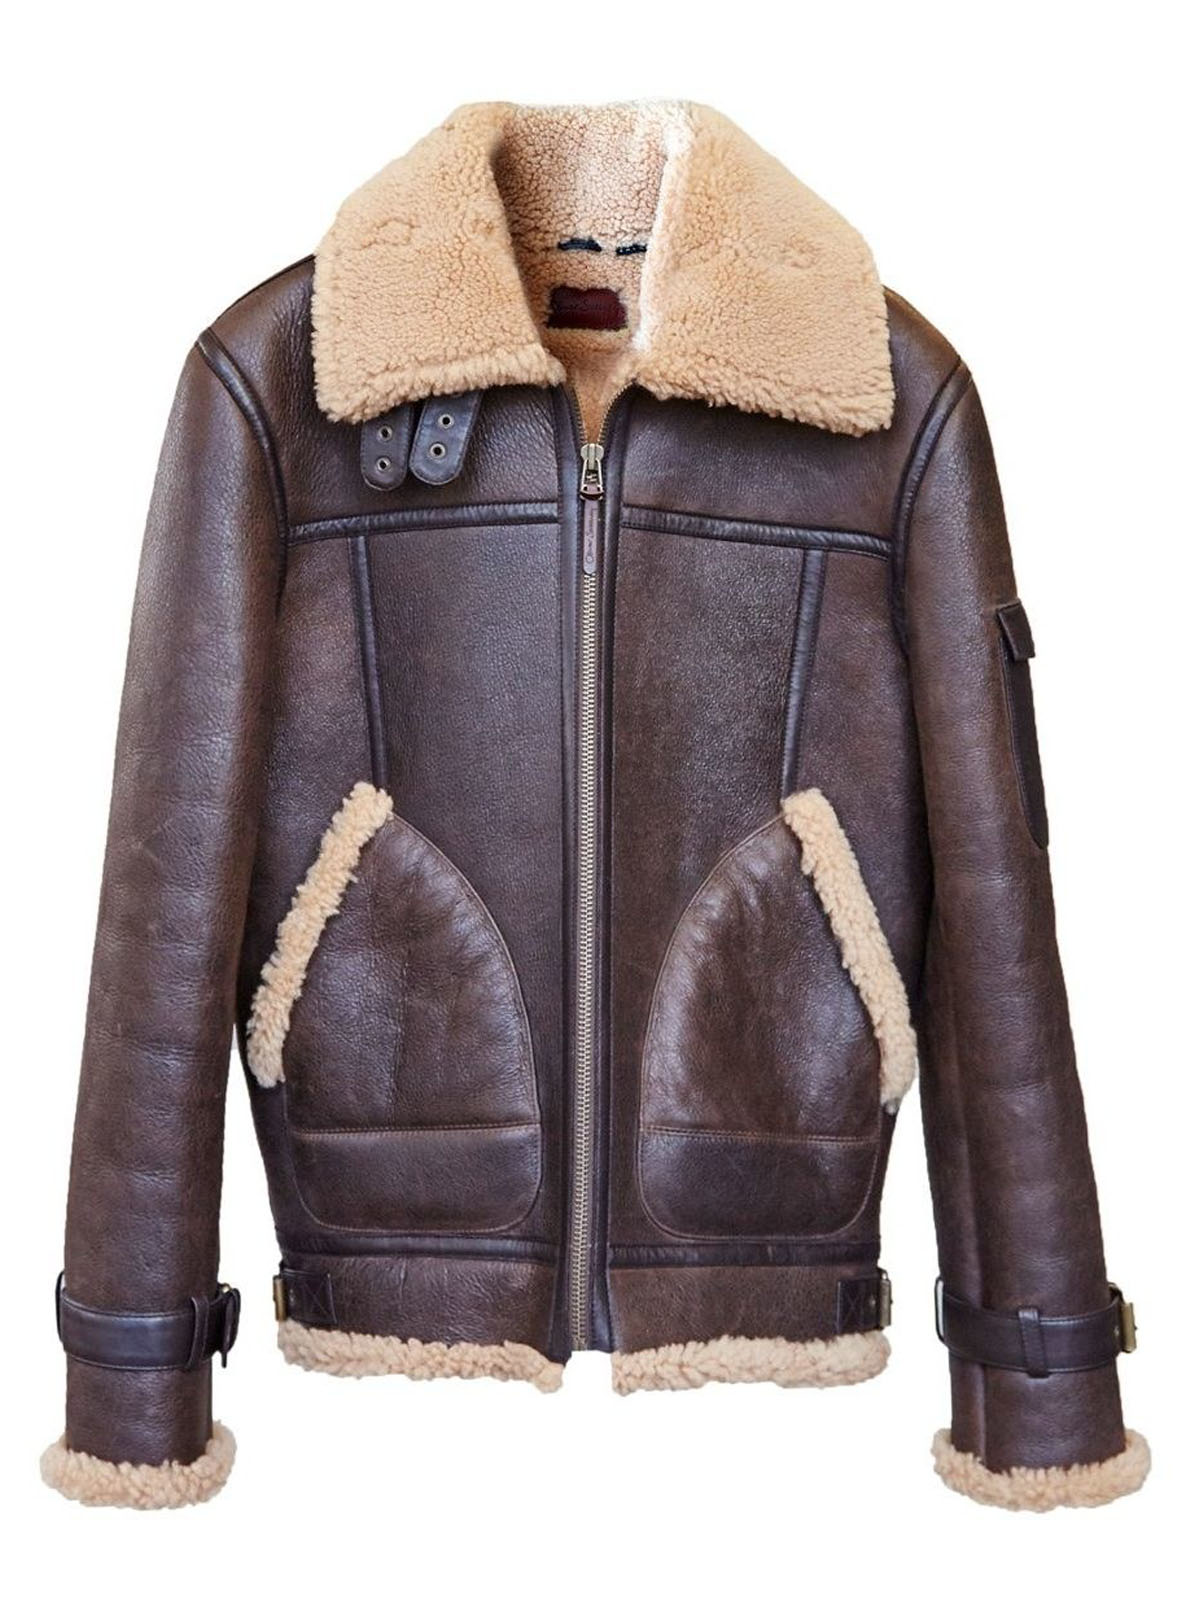 Althorne Tobacco Leather Aviator Jacket – Bay Perfect